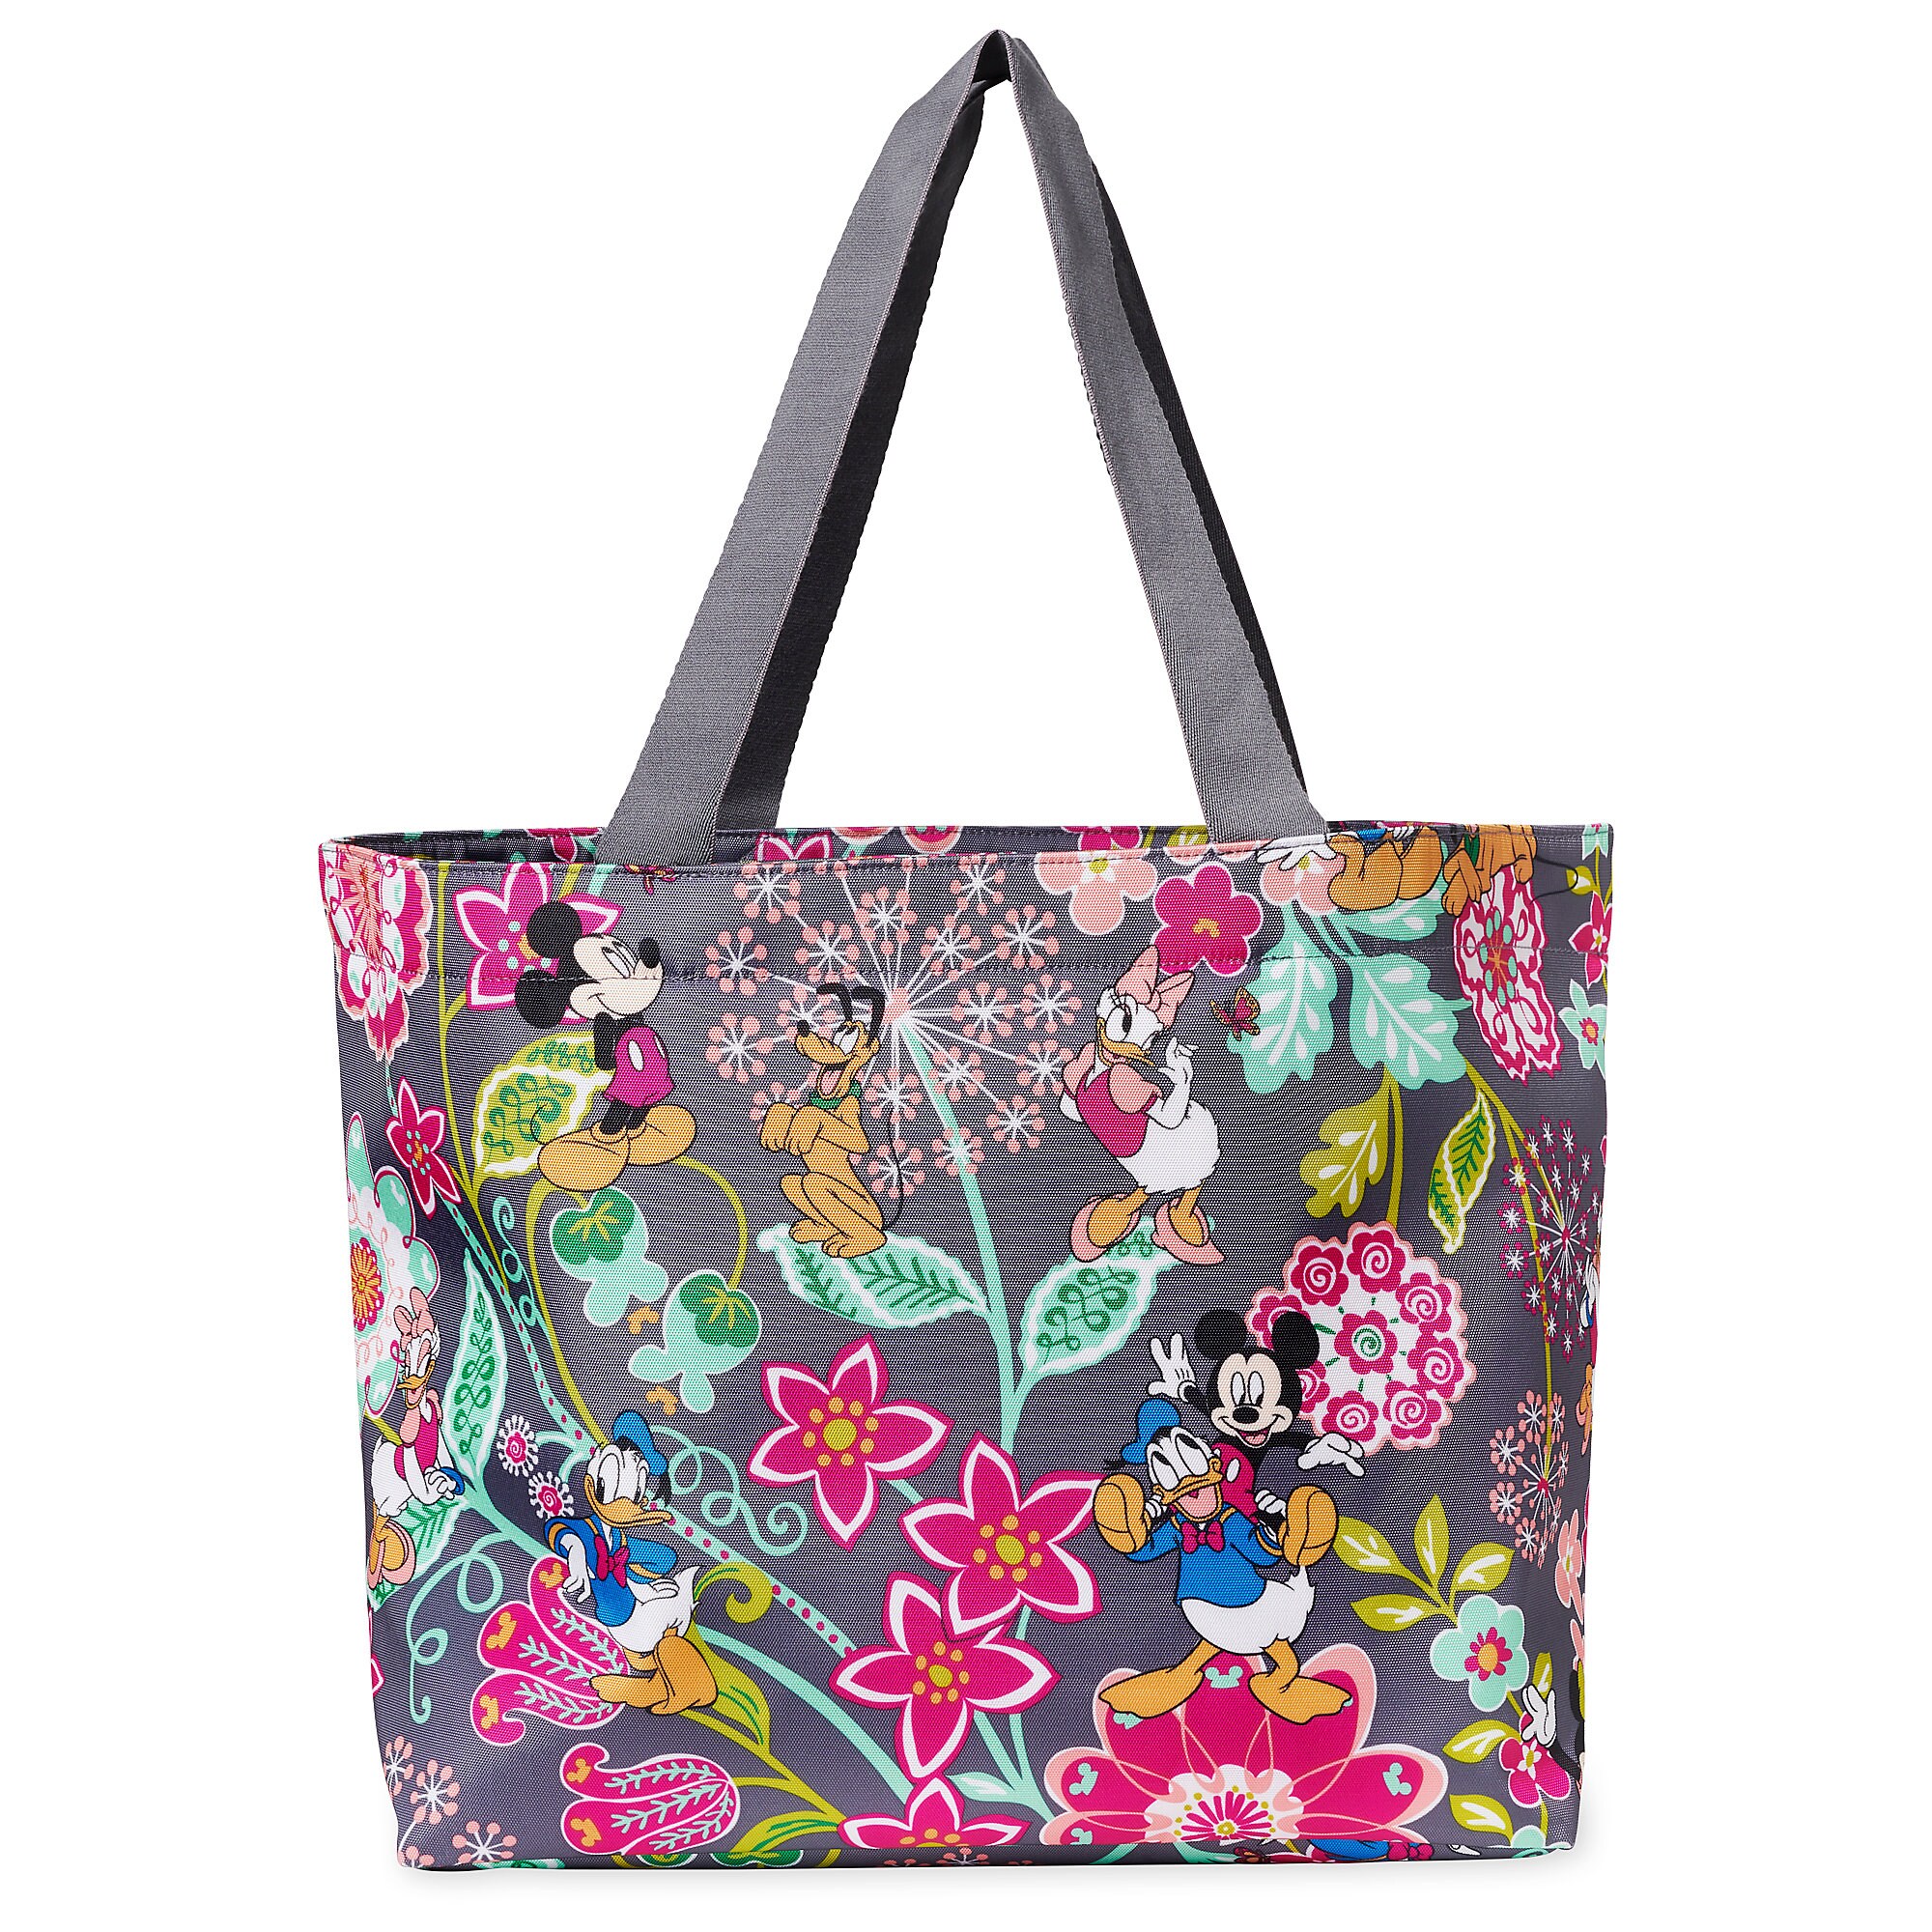 Mickey Mouse and Friends Drawstring Tote by Vera Bradley has hit the ...